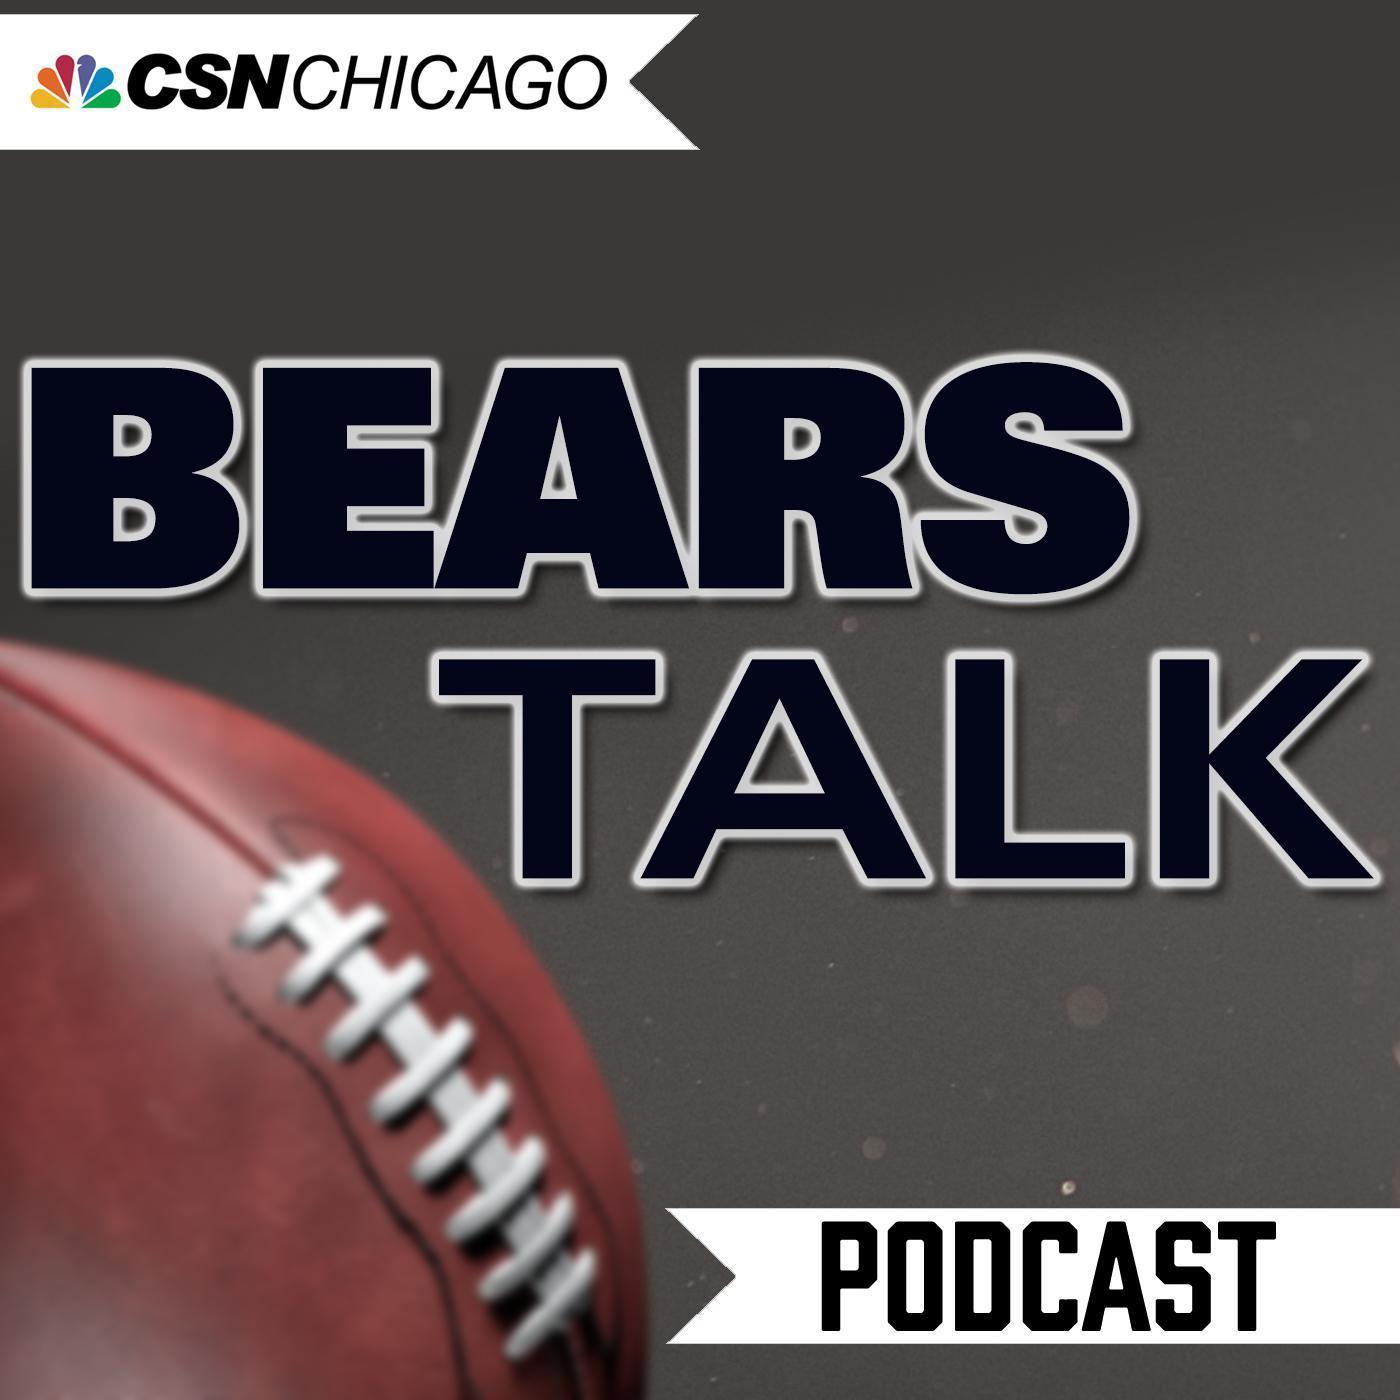 Ep. 12: Bears collapse late in loss to Jaguars